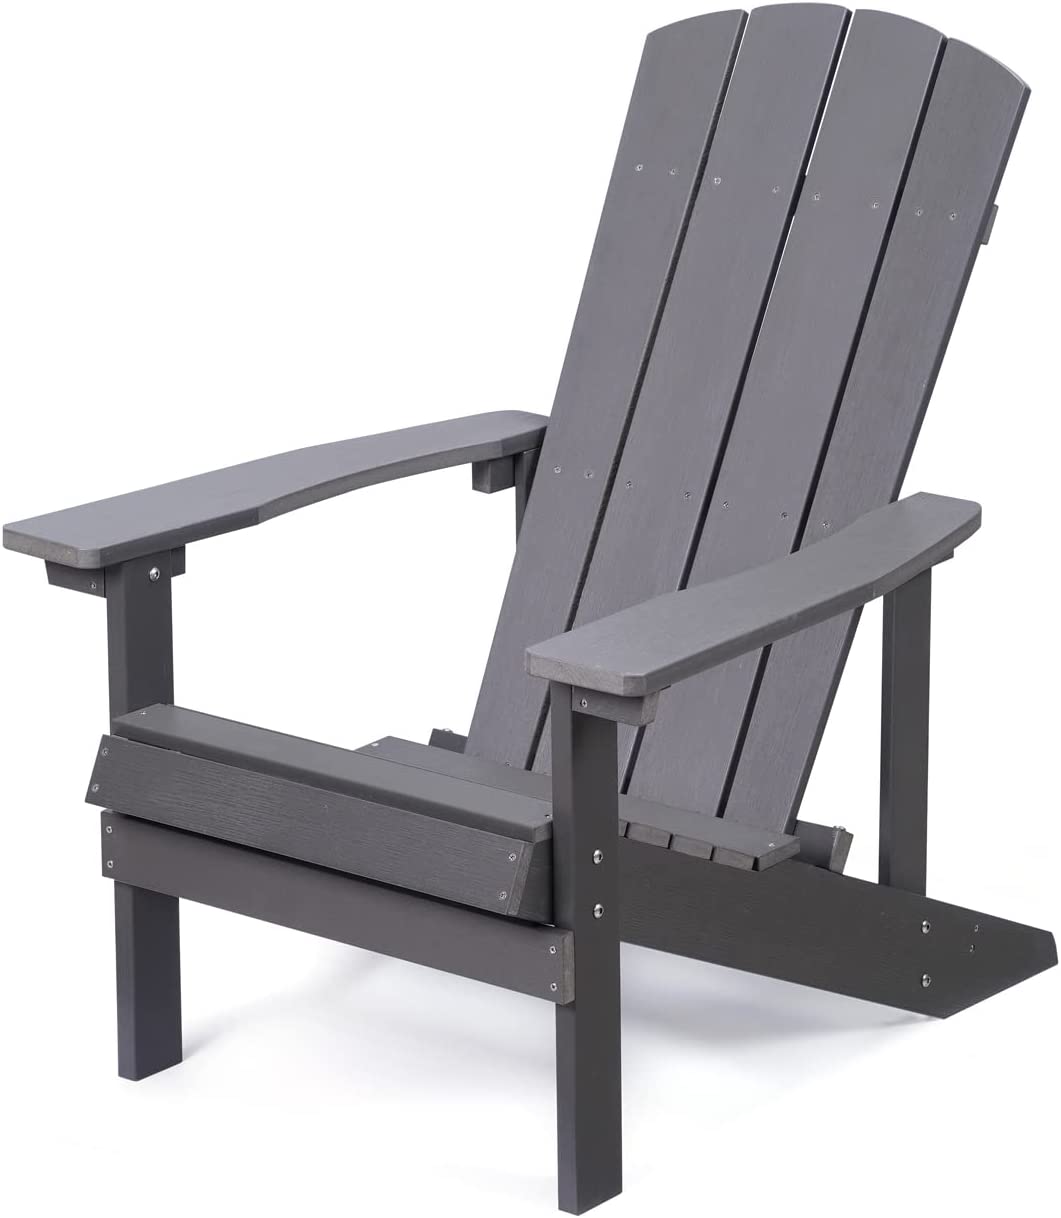 Plastic Adirondack Chair, Weather Resistant Patio Chairs, Outdoor Deck Fire Pit Chairs